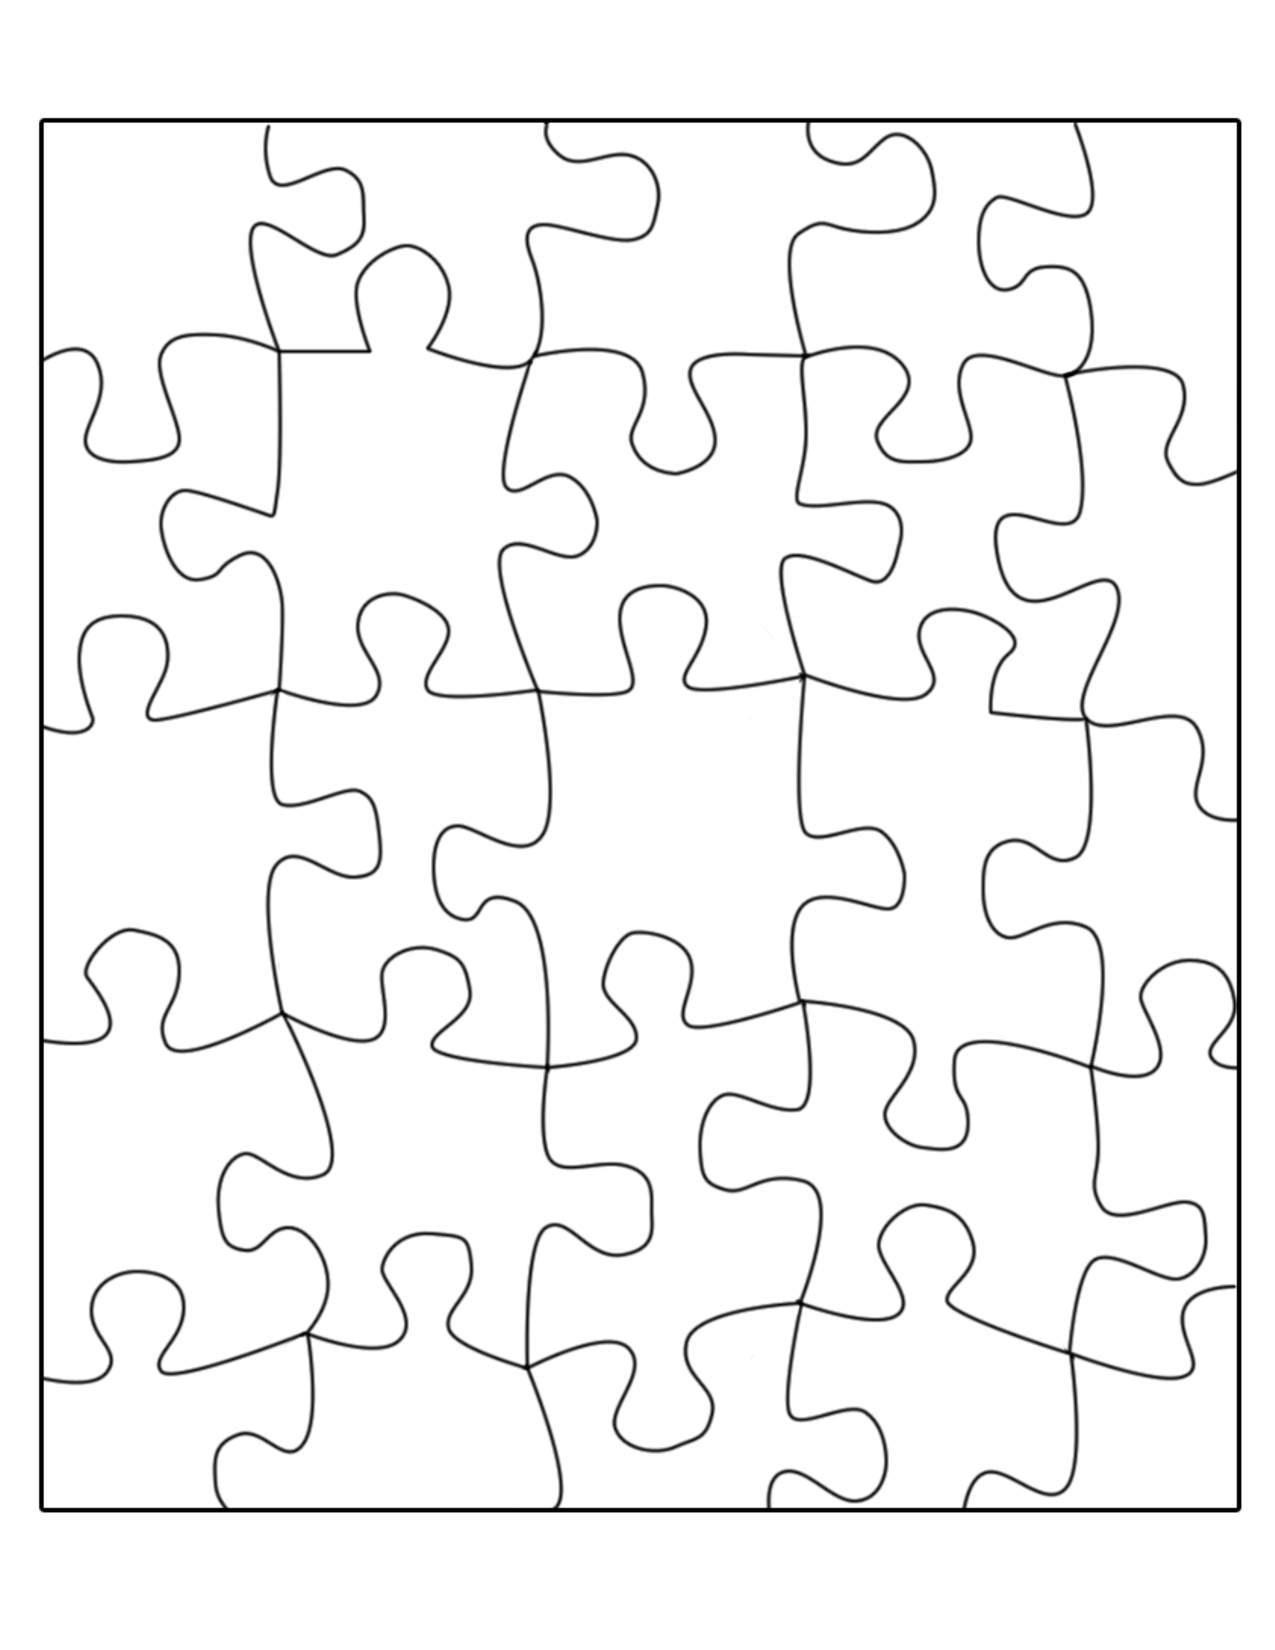 Free Puzzle Template, Download Free Clip Art, Free Clip Art On - Printable Heart Puzzle Template